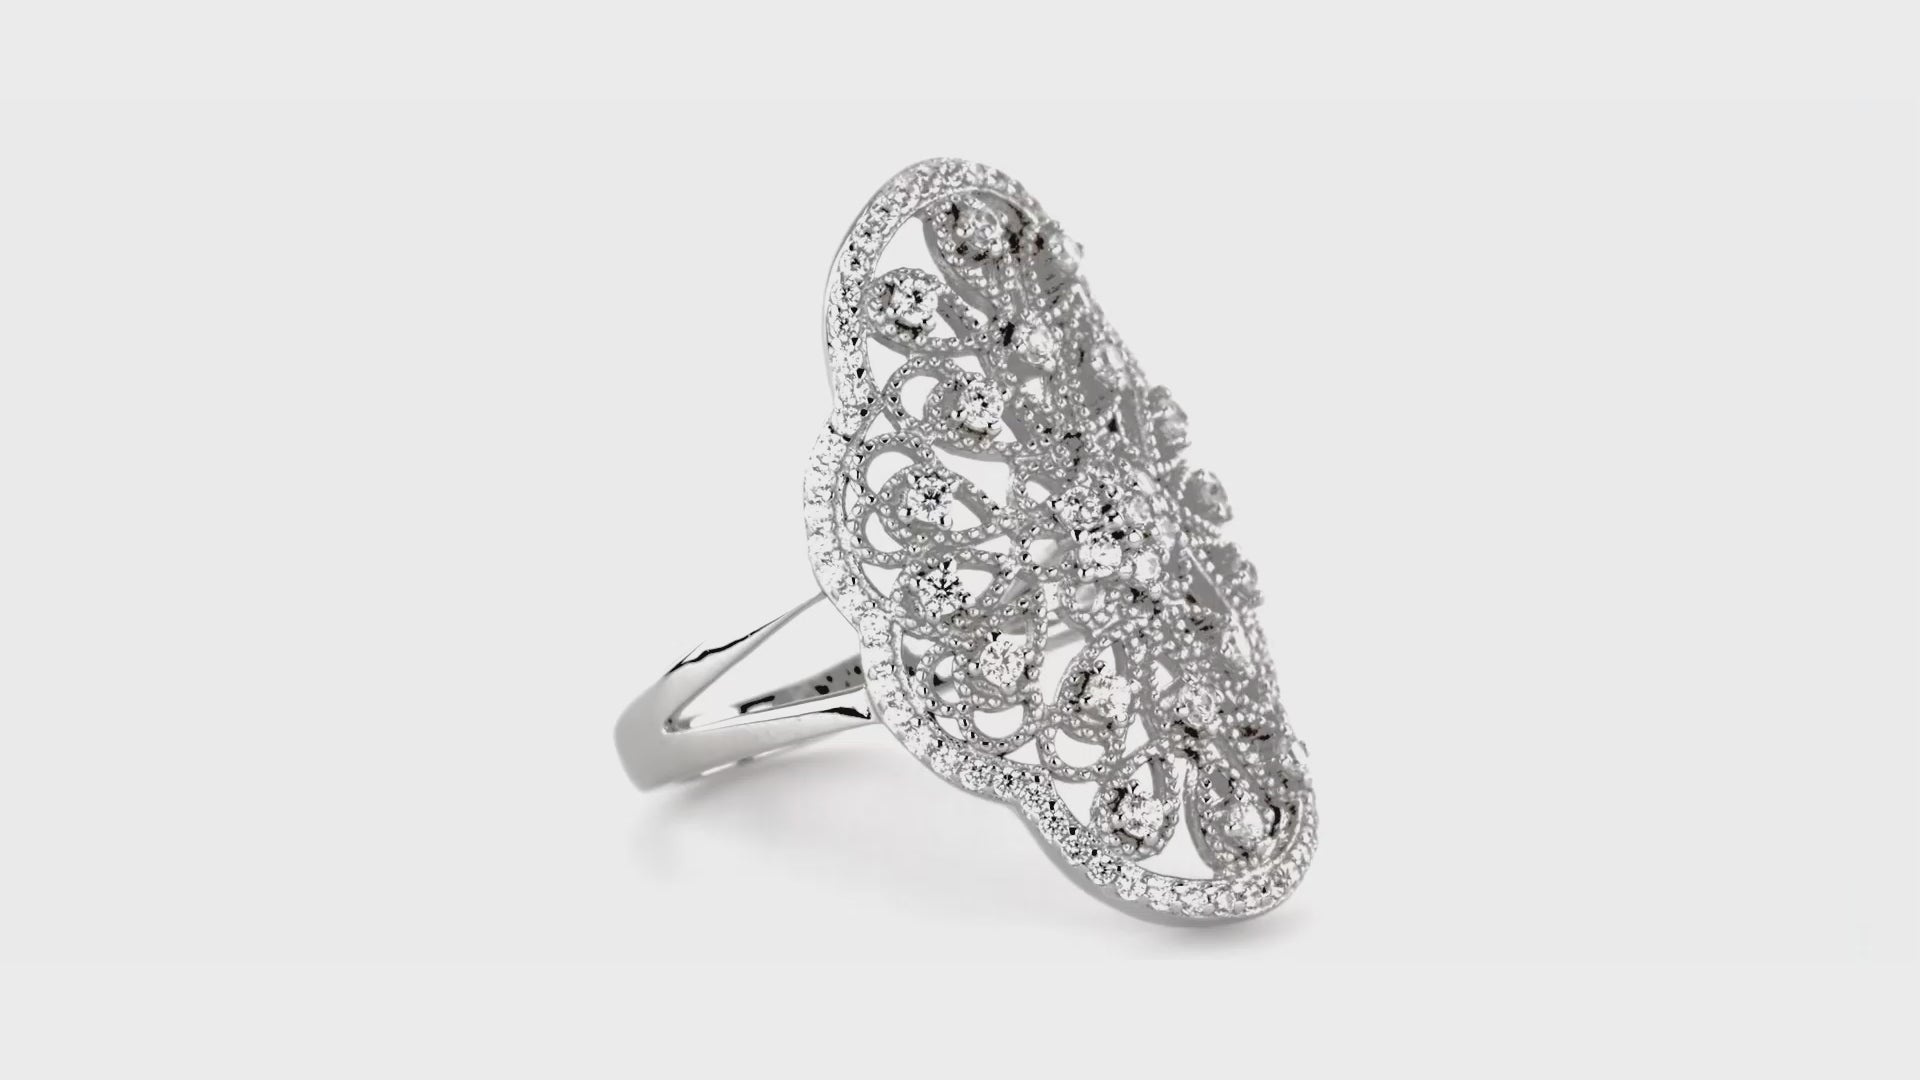 Video Contains Flower Navette CZ Statement Ring in Sterling Silver. Style Number R1262-01